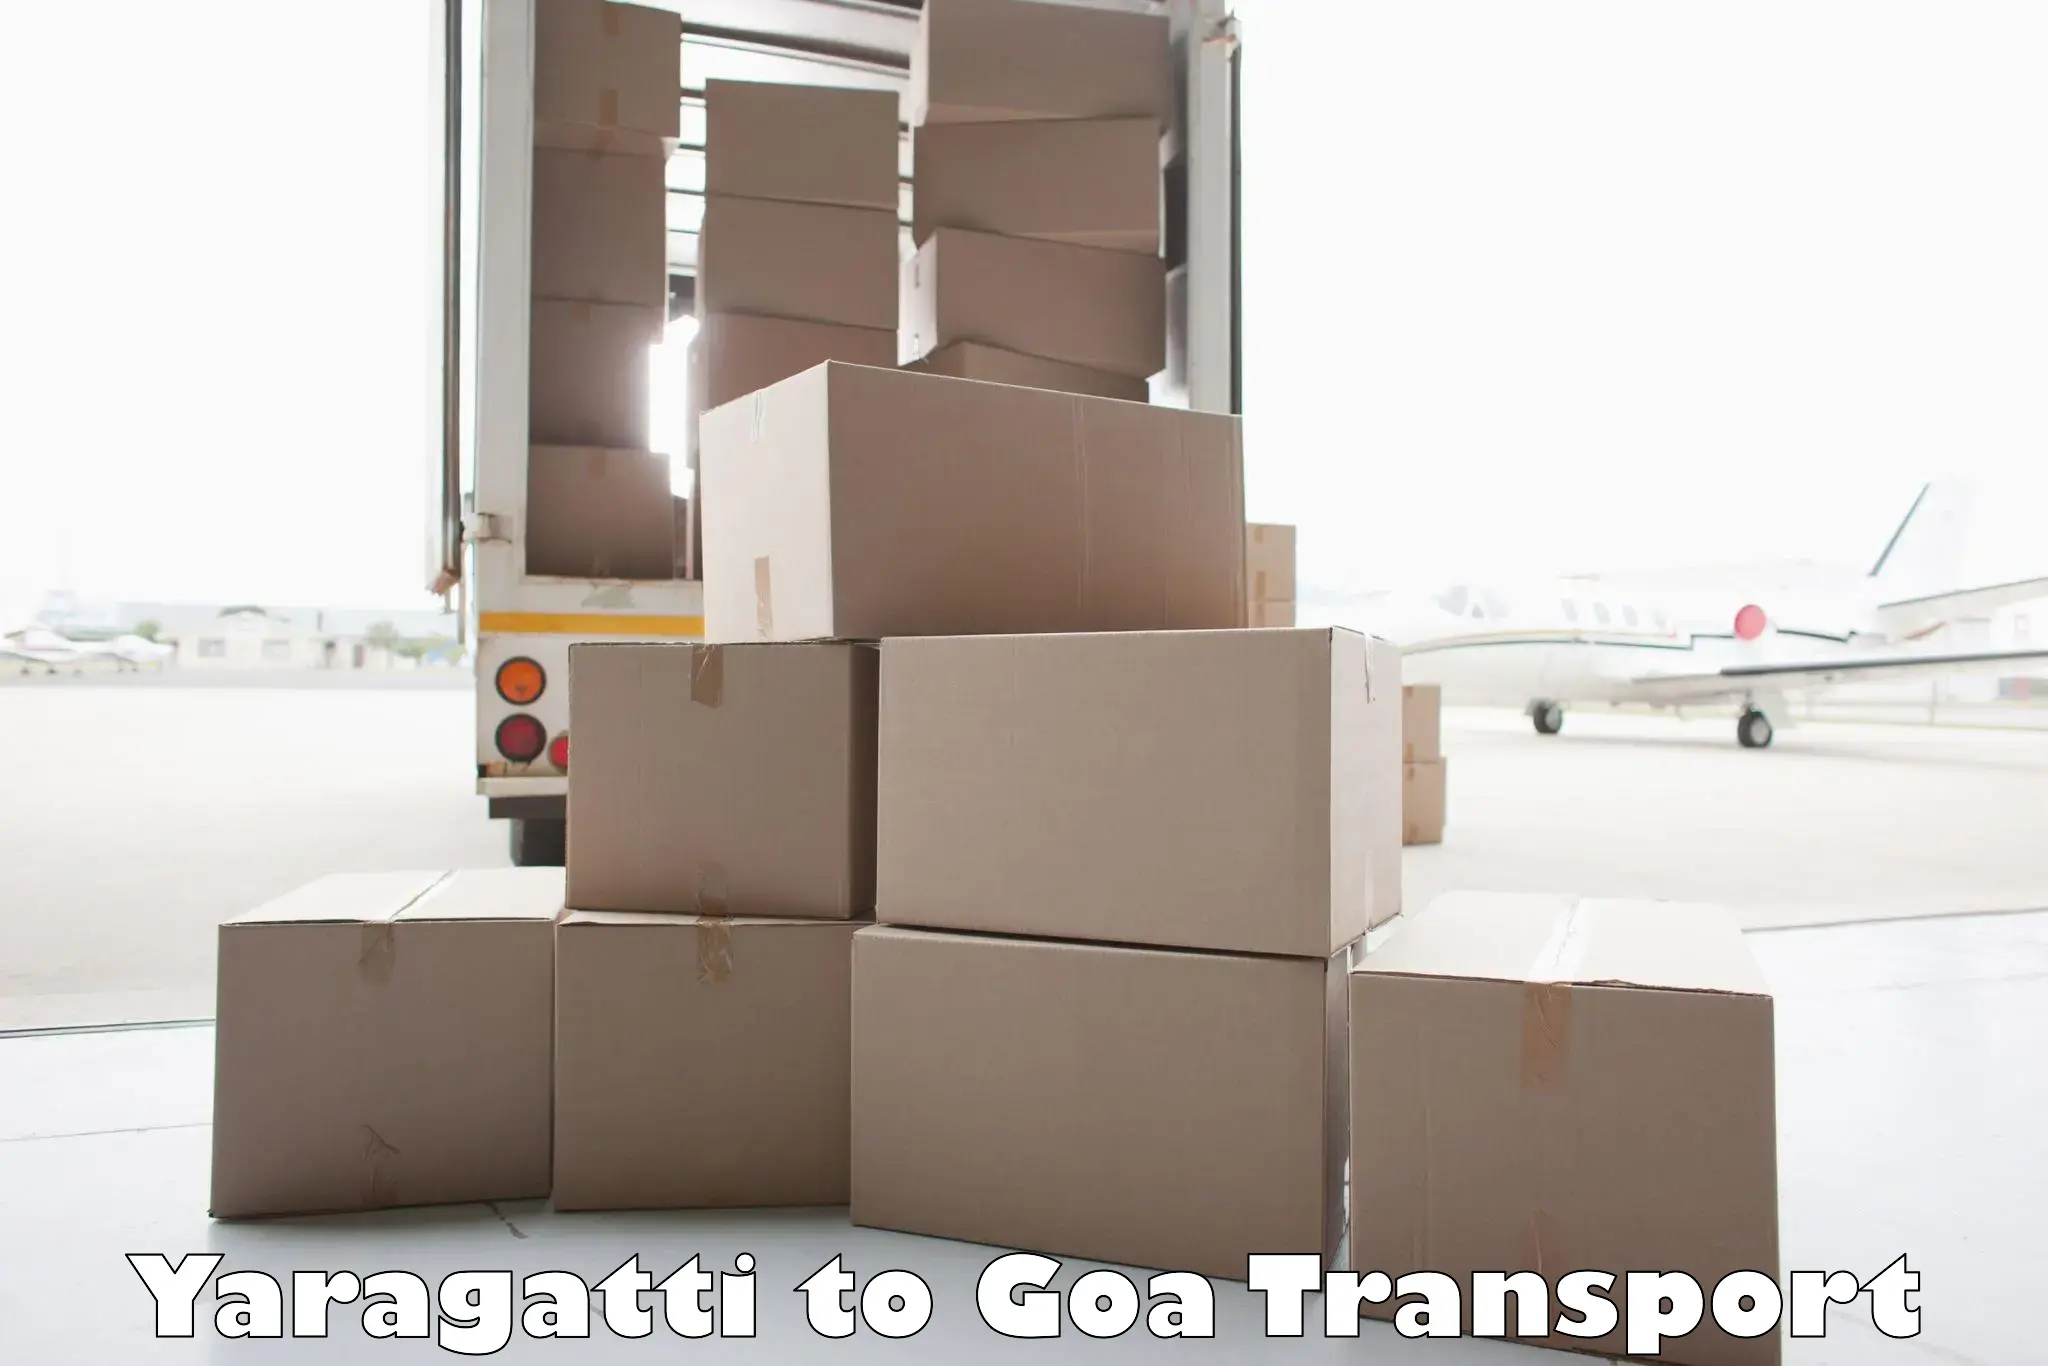 Transport shared services Yaragatti to Margao